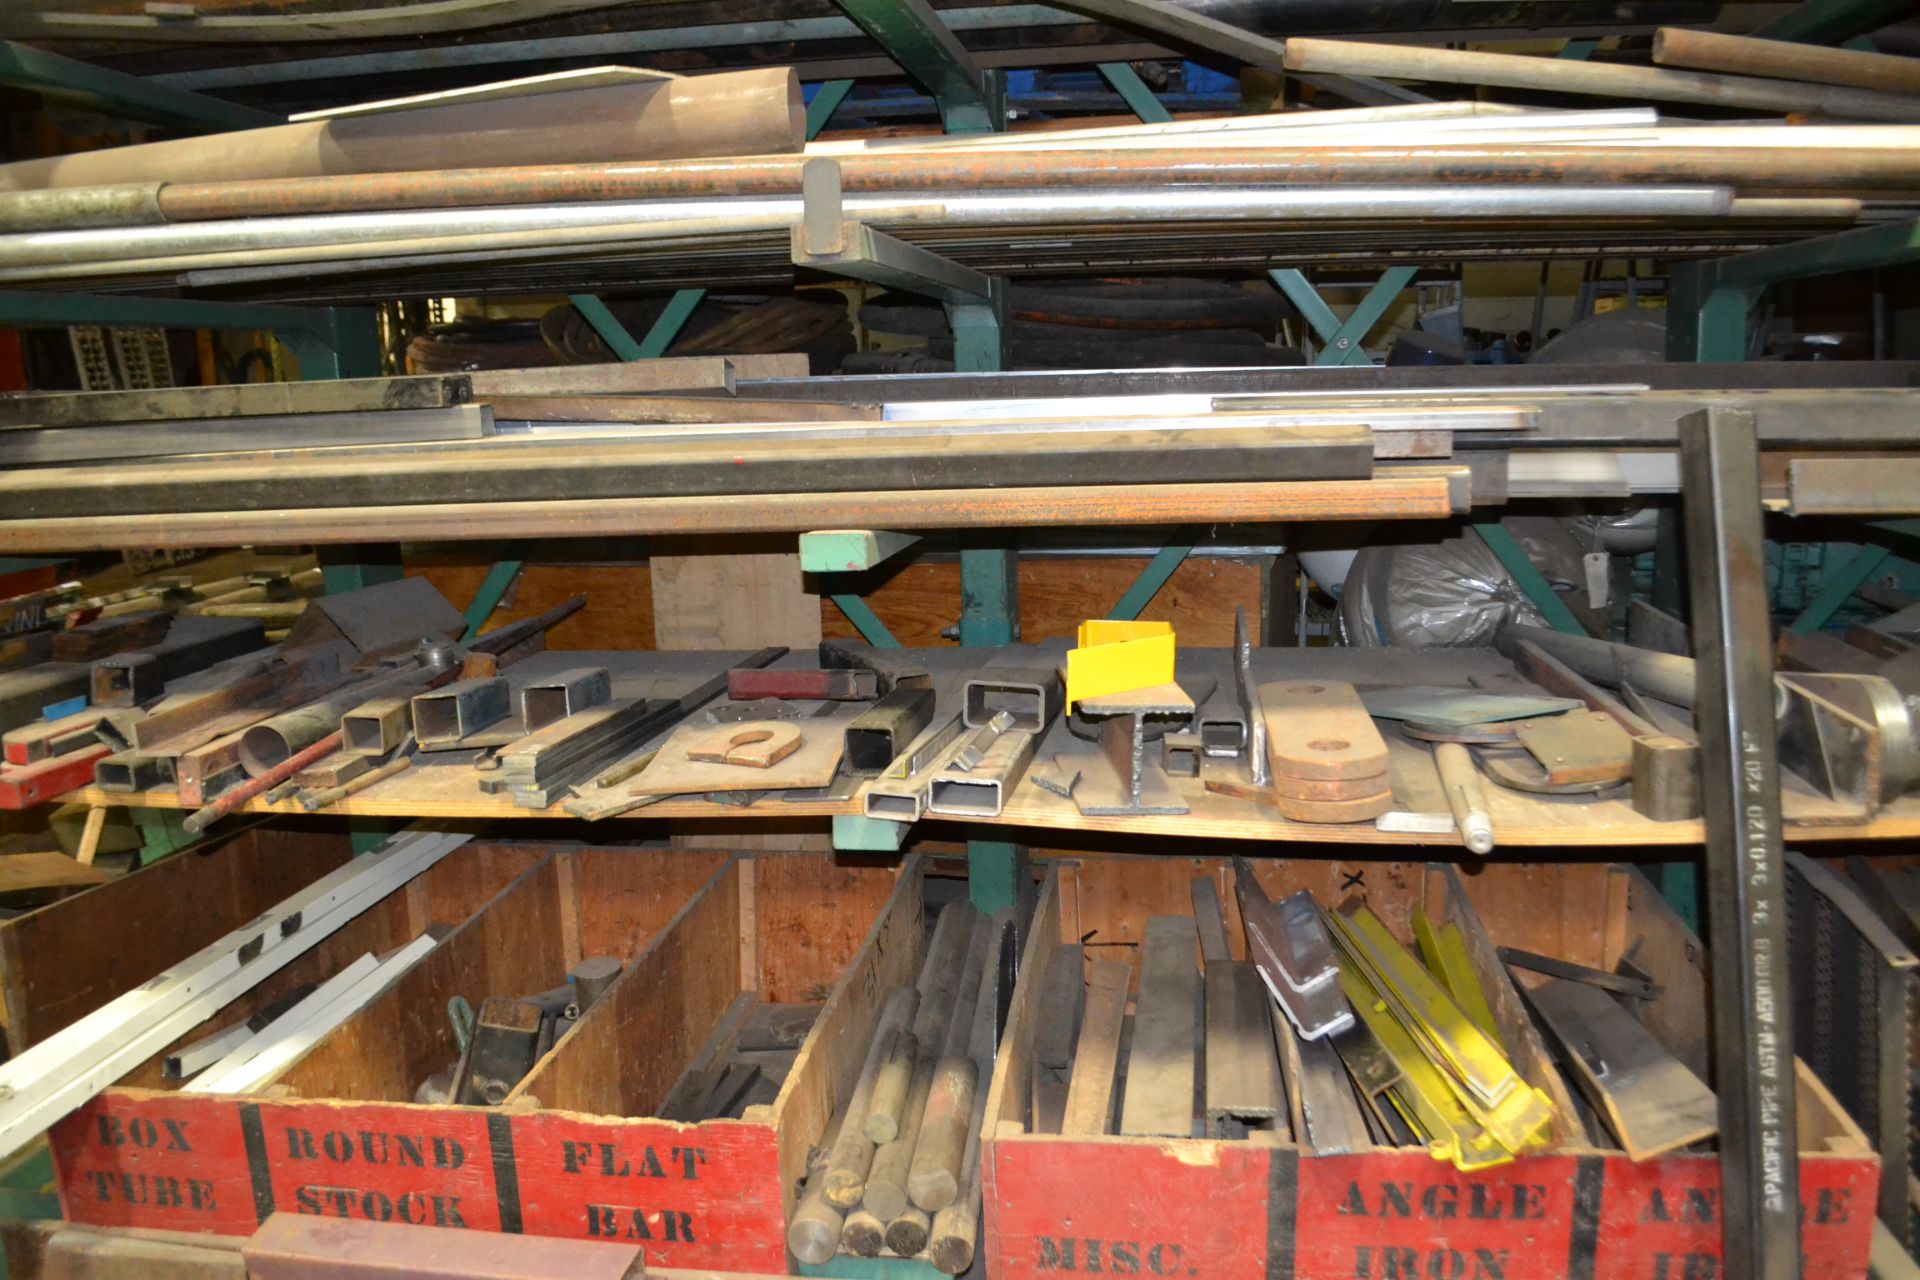 All Metal and Wood Contents on Section of Racking - Image 3 of 3